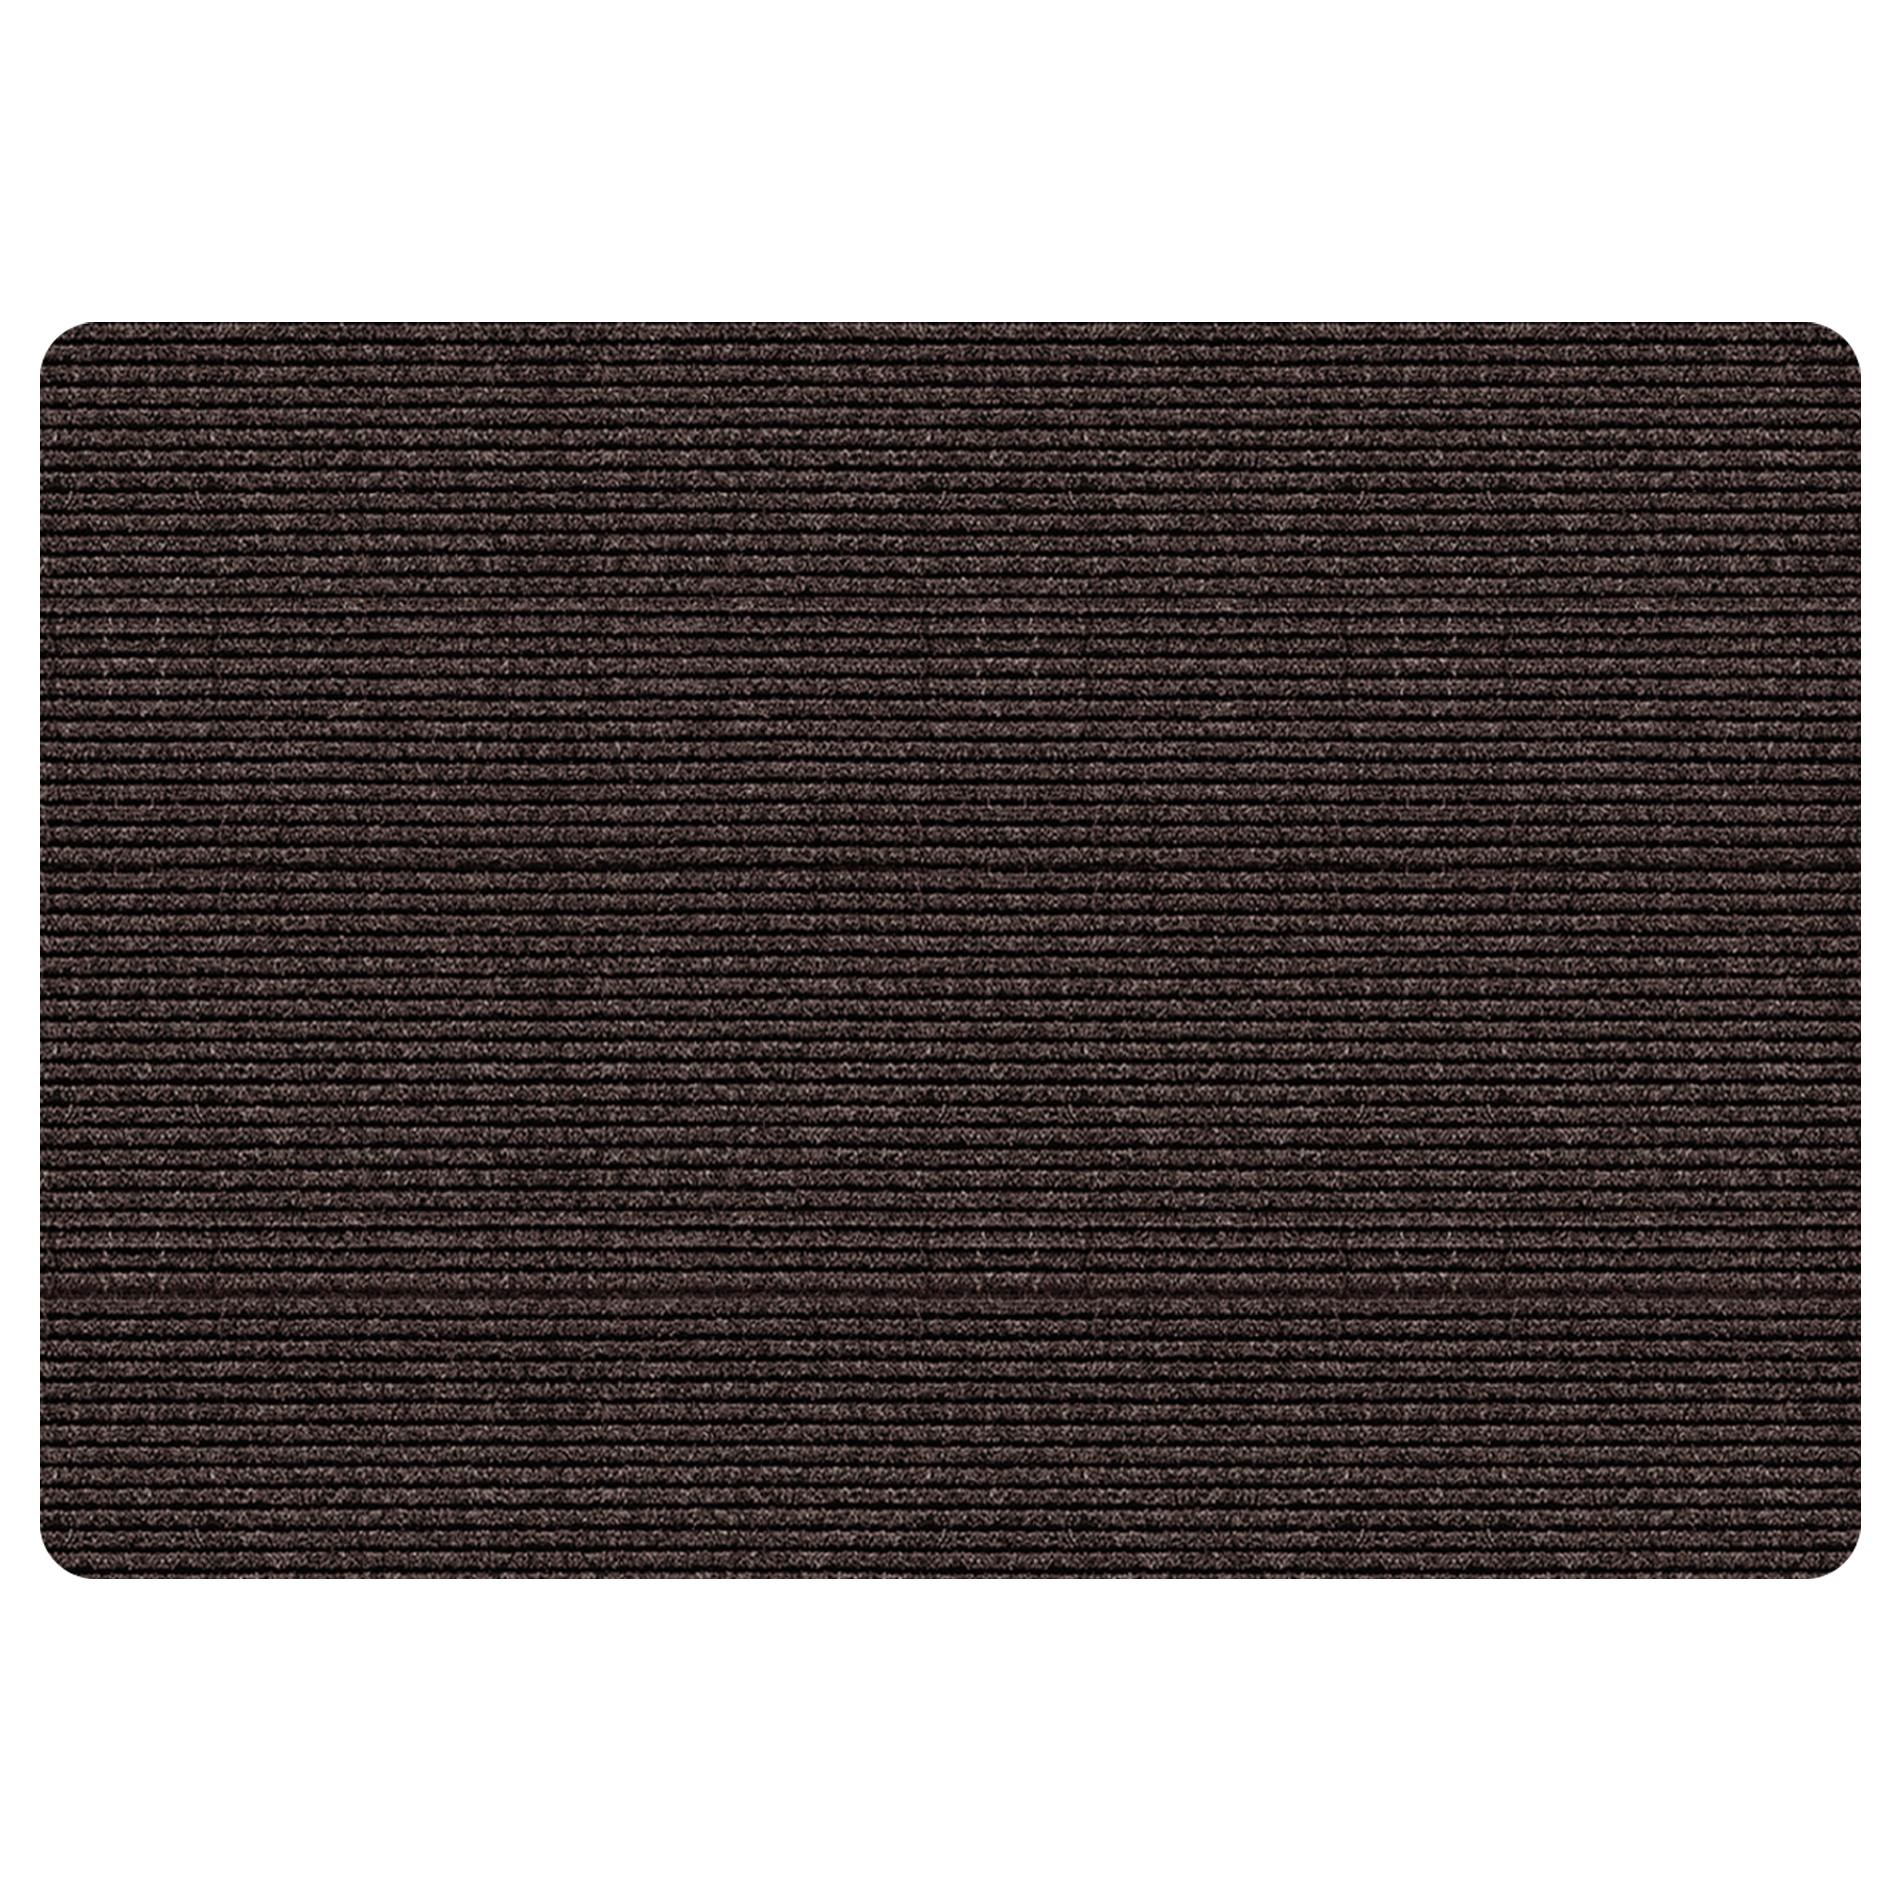 UPC 066296000902 product image for Essential Home Indoor Outdoor Rug - 36 x 48 - Brown Stripe | upcitemdb.com